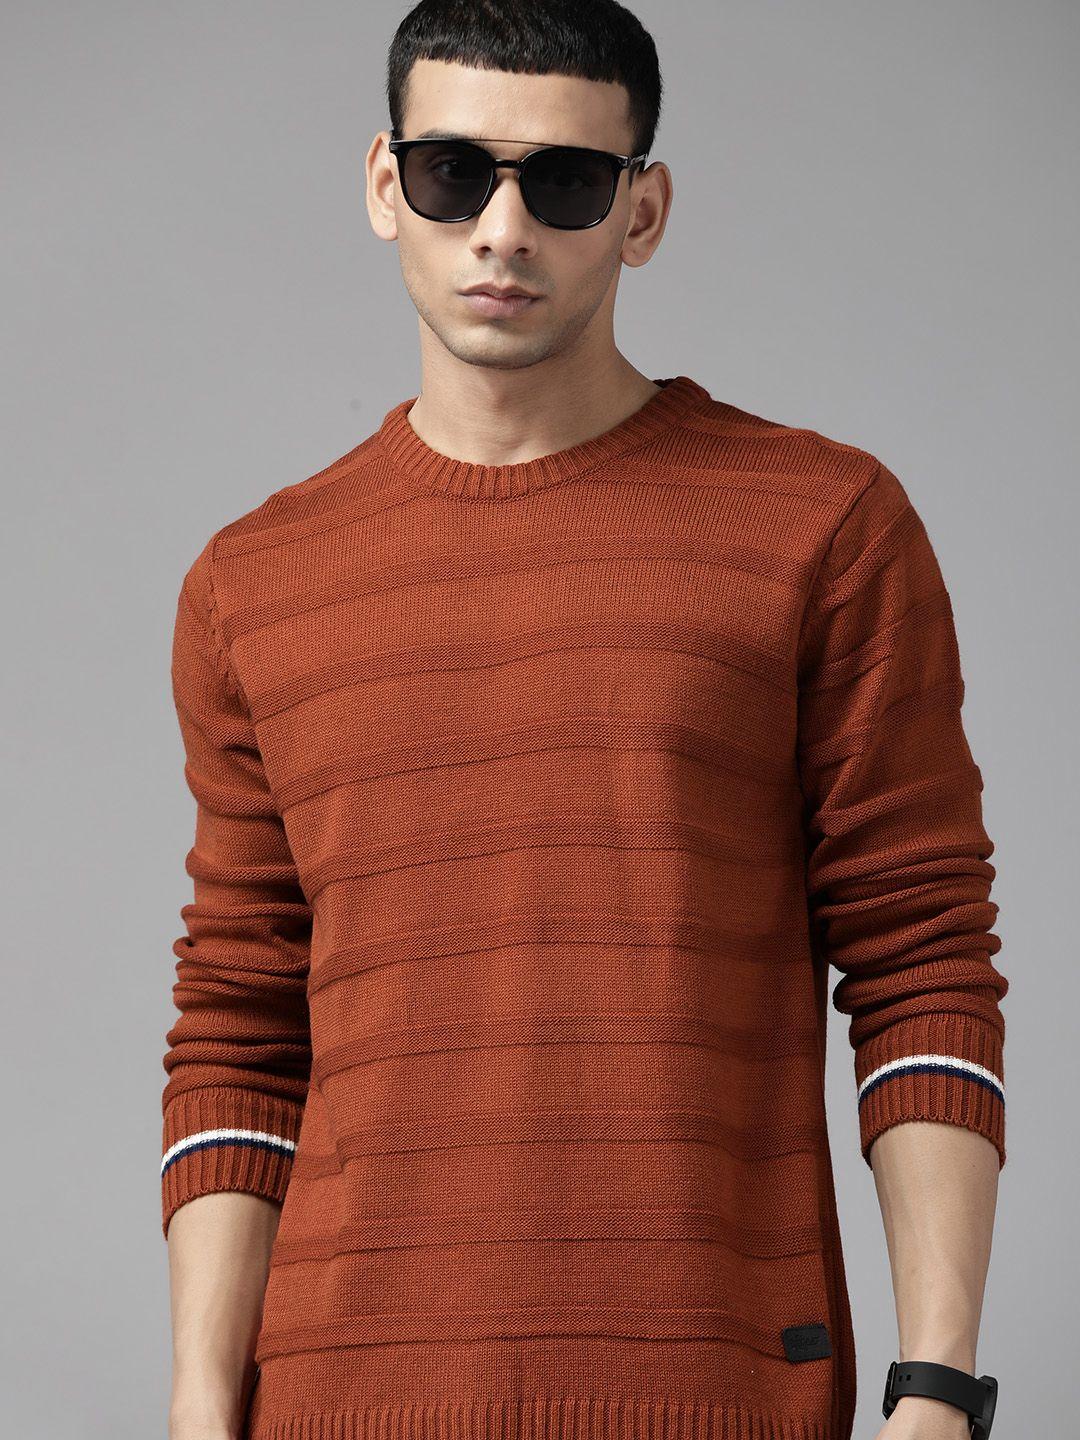 the roadster lifestyle co. men rust brown acrylic striped knitted pullover